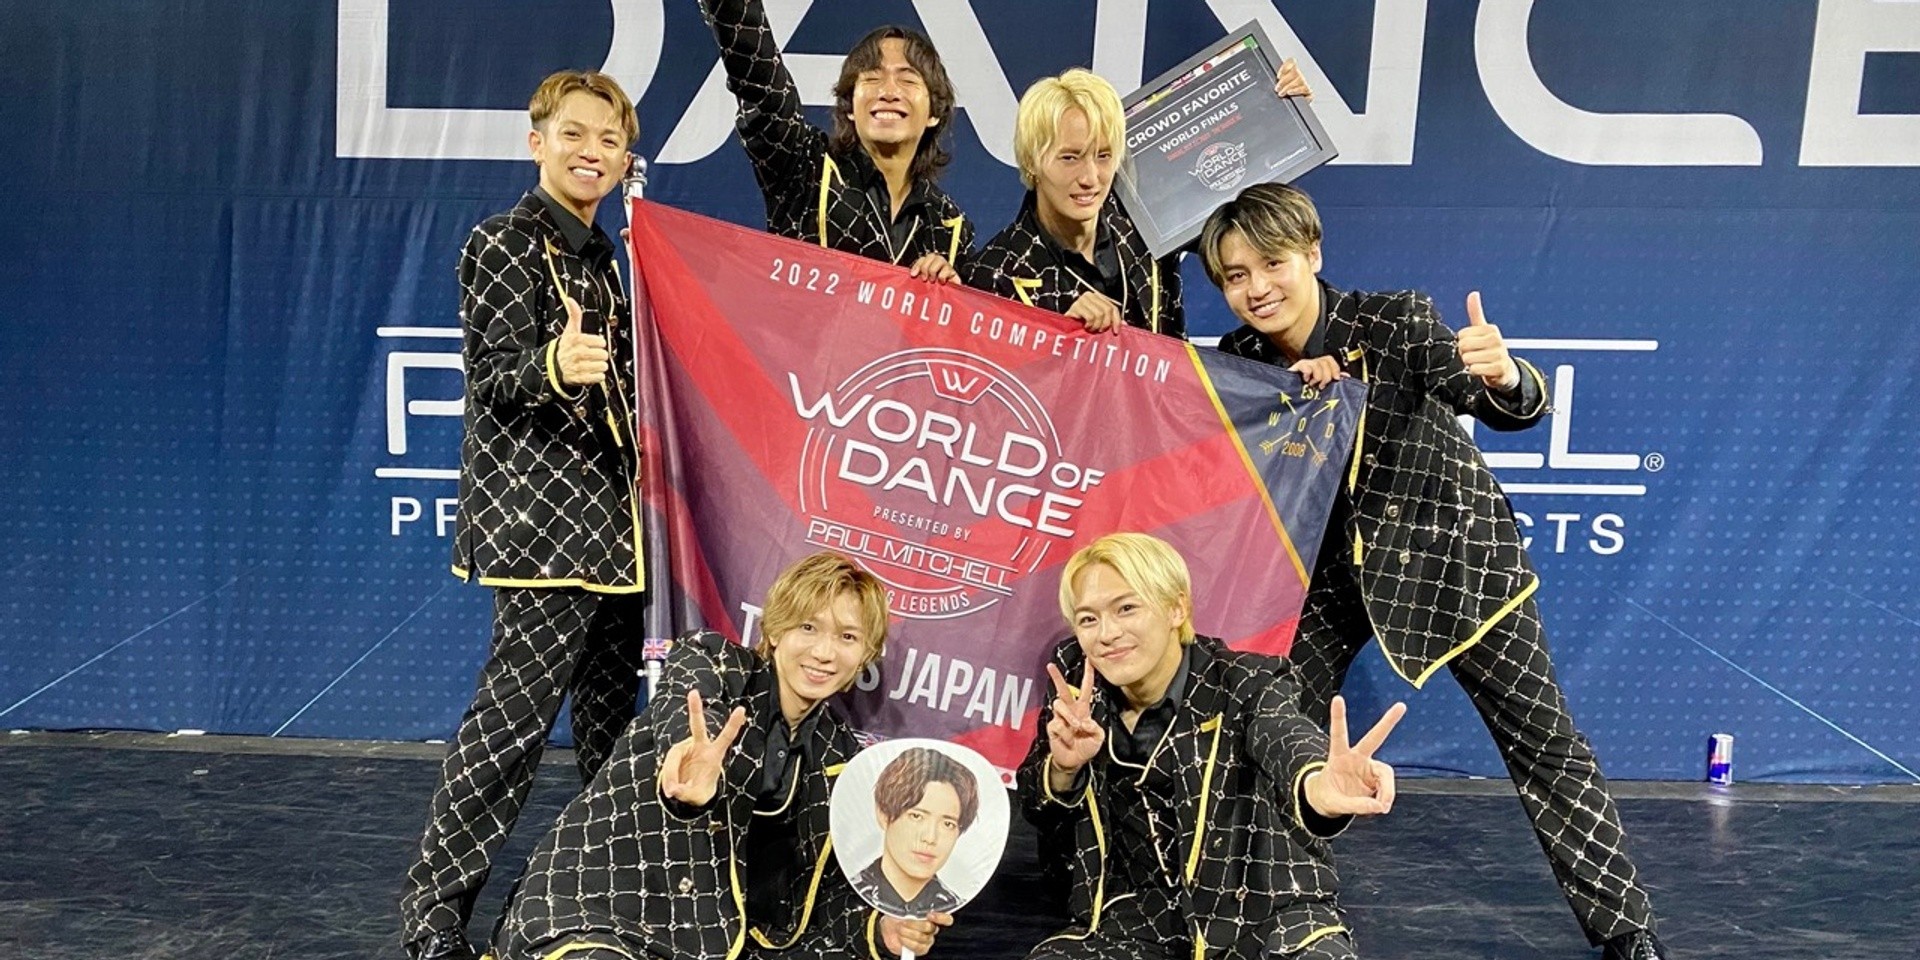 Travis Japan's Kaito Miyachika on participating at the World of Dance Championships 2022: "The experience we've had here will forever be our treasured memory."